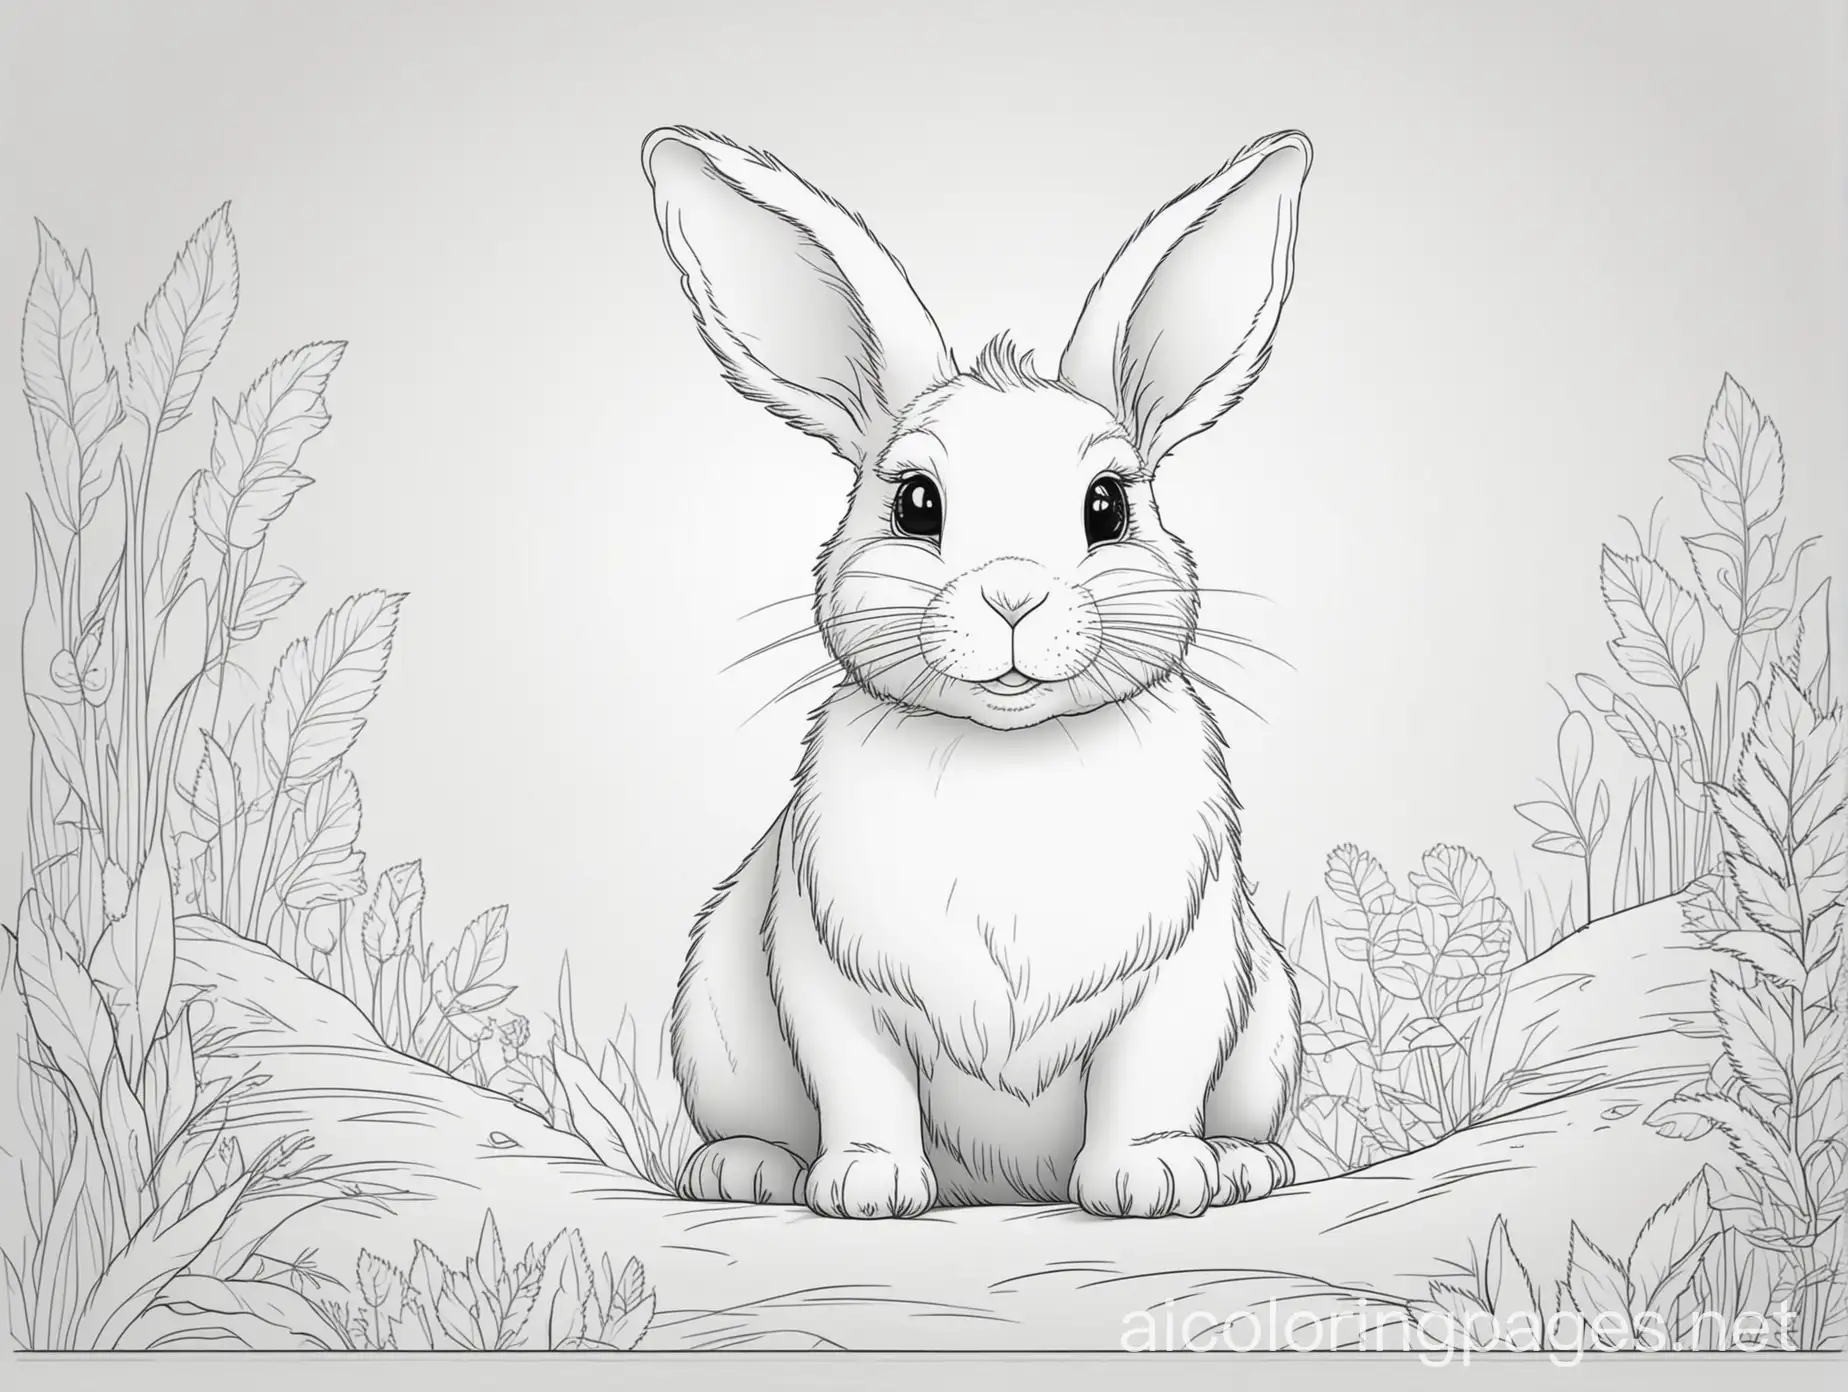 Rabbit with background
, Coloring Page, black and white, line art, white background, Simplicity, Ample White Space. The background of the coloring page is plain white to make it easy for young children to color within the lines. The outlines of all the subjects are easy to distinguish, making it simple for kids to color without too much difficulty